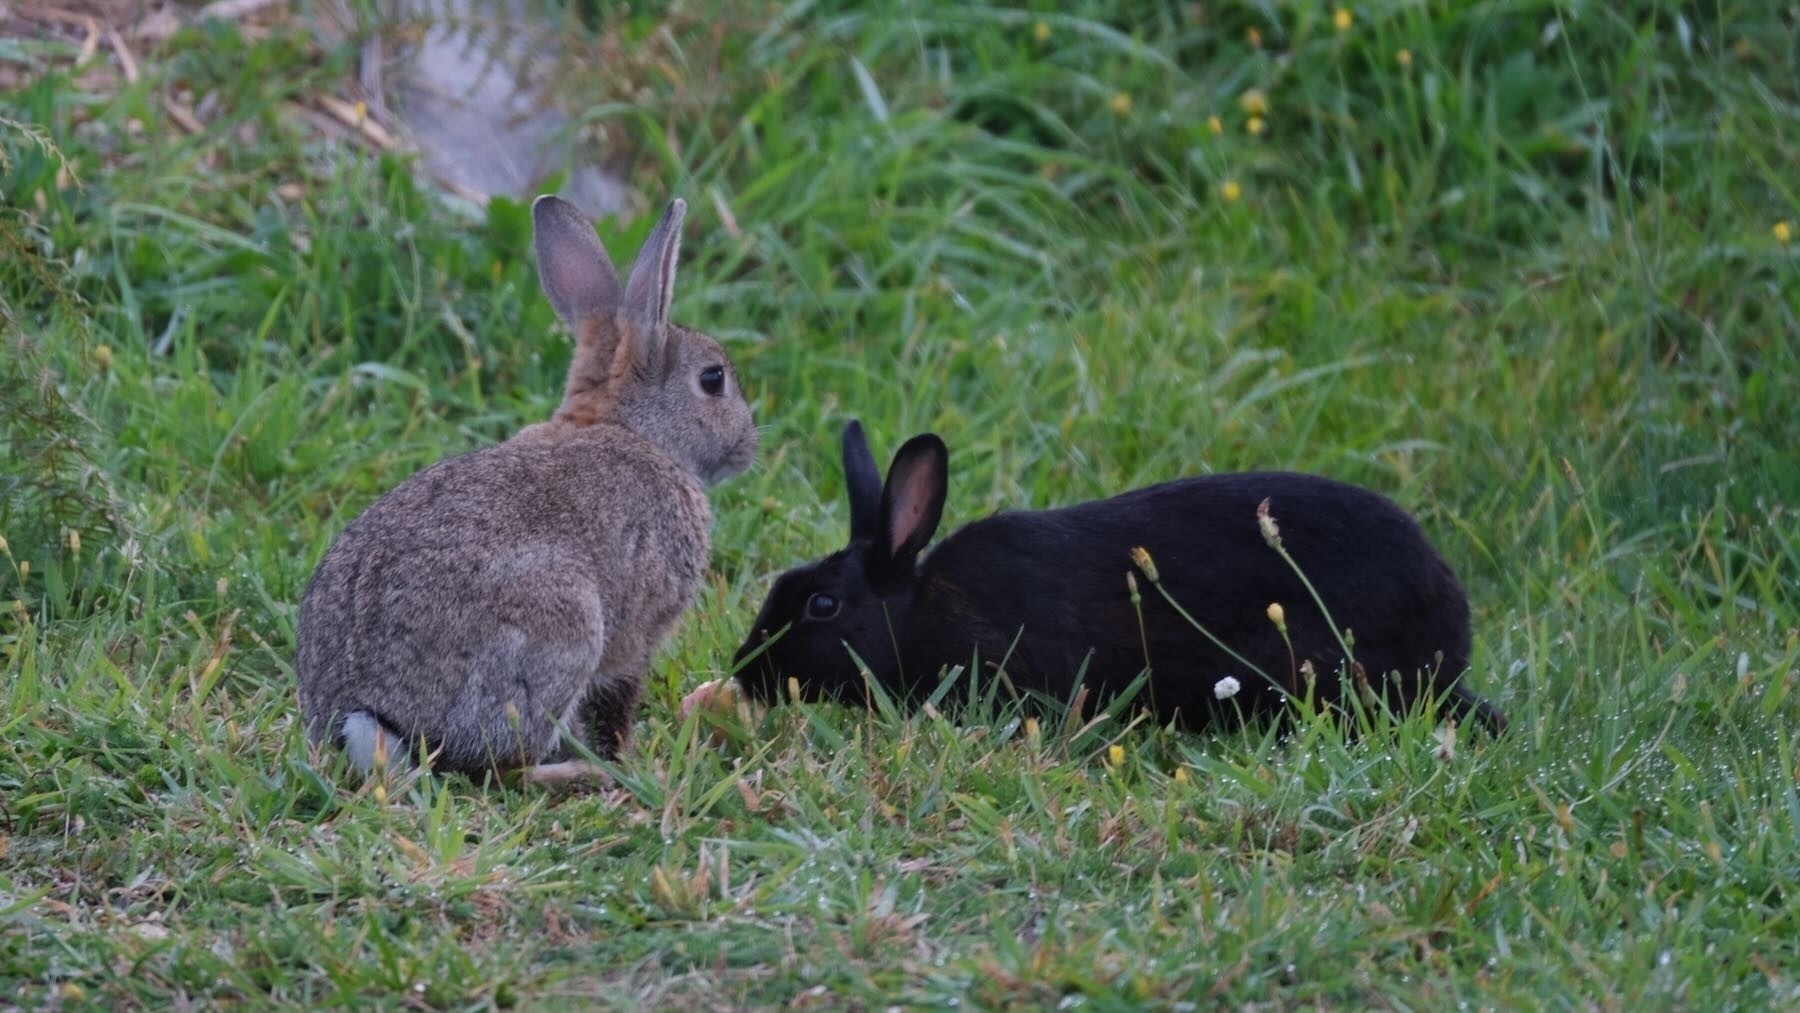 Black and grey rabbits eat an apple on the grass. 